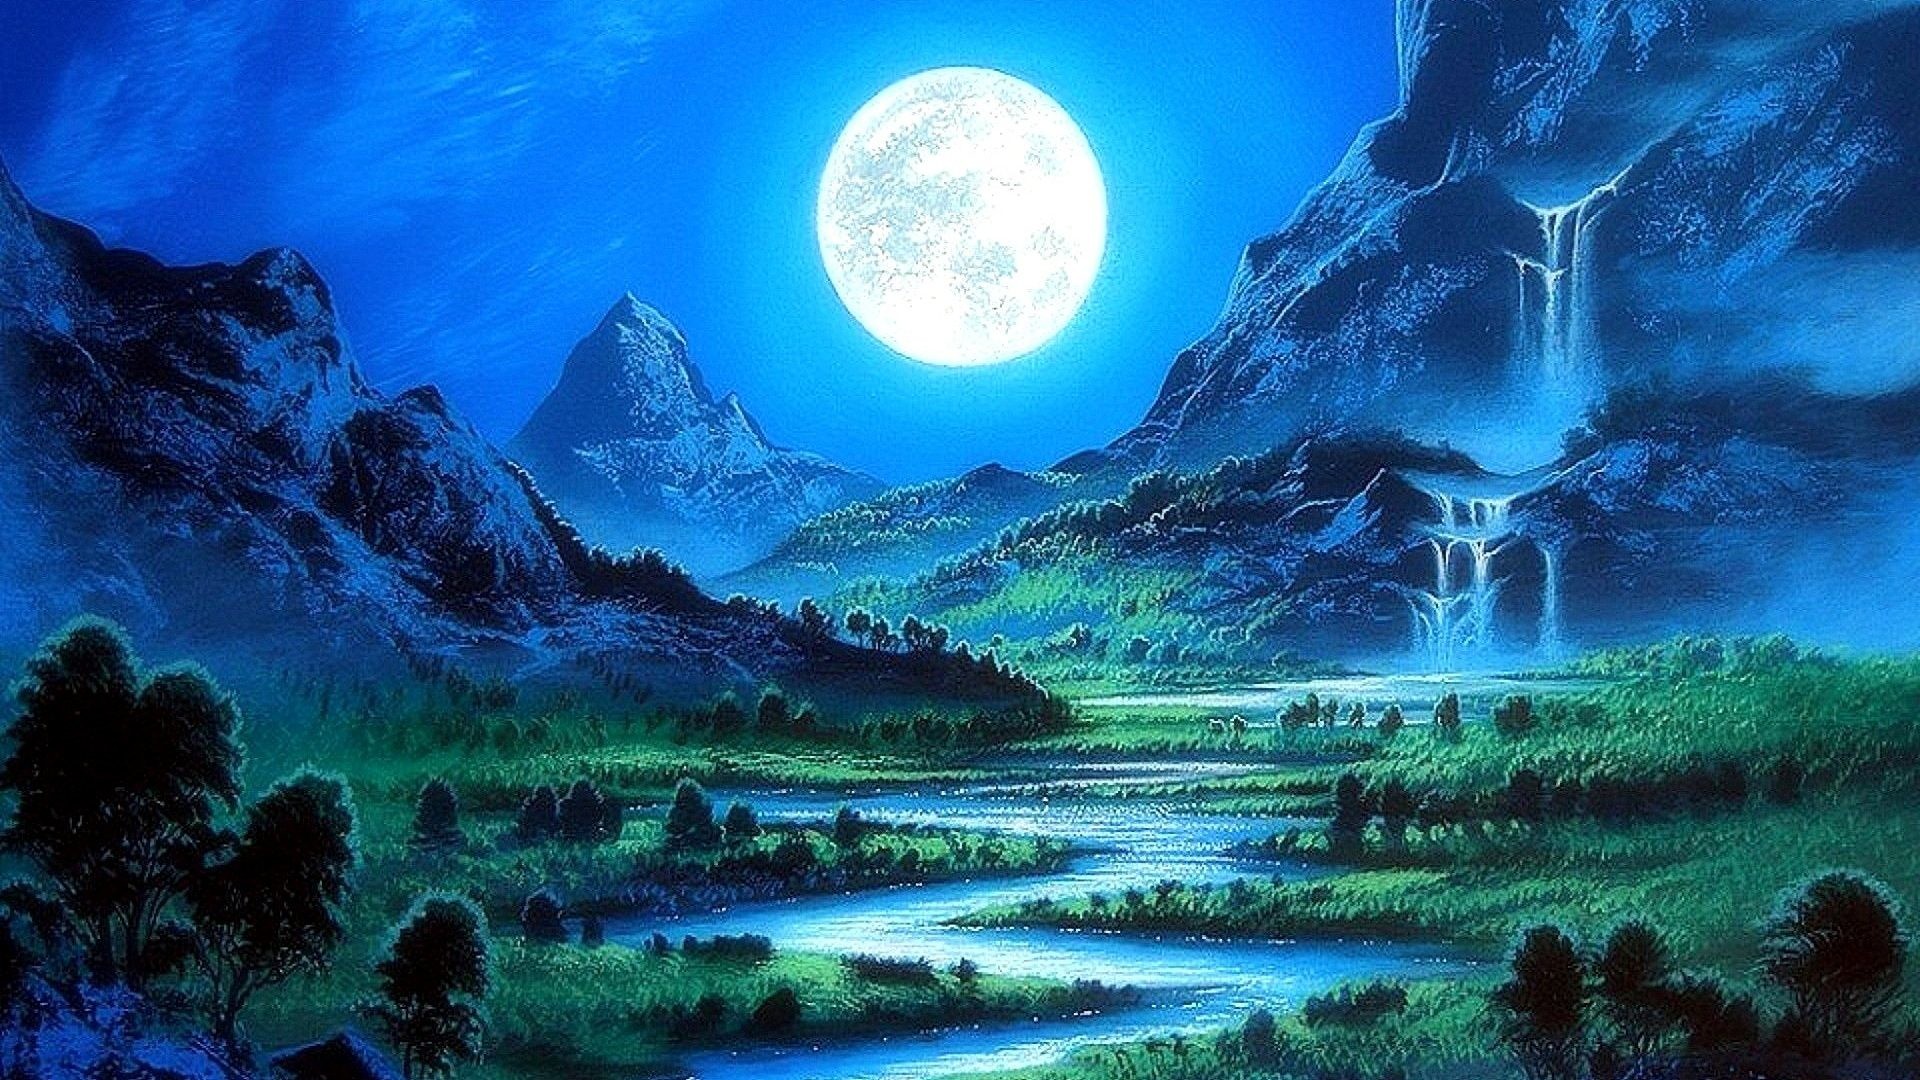 1920x1080 Scenery Moon Beautiful Stunning Cool Moonlight Pre Four Bright Paintings  Nature Downloaded Seasons Rivers Art Mountains Trees Full Blue Paradise  Creative ...